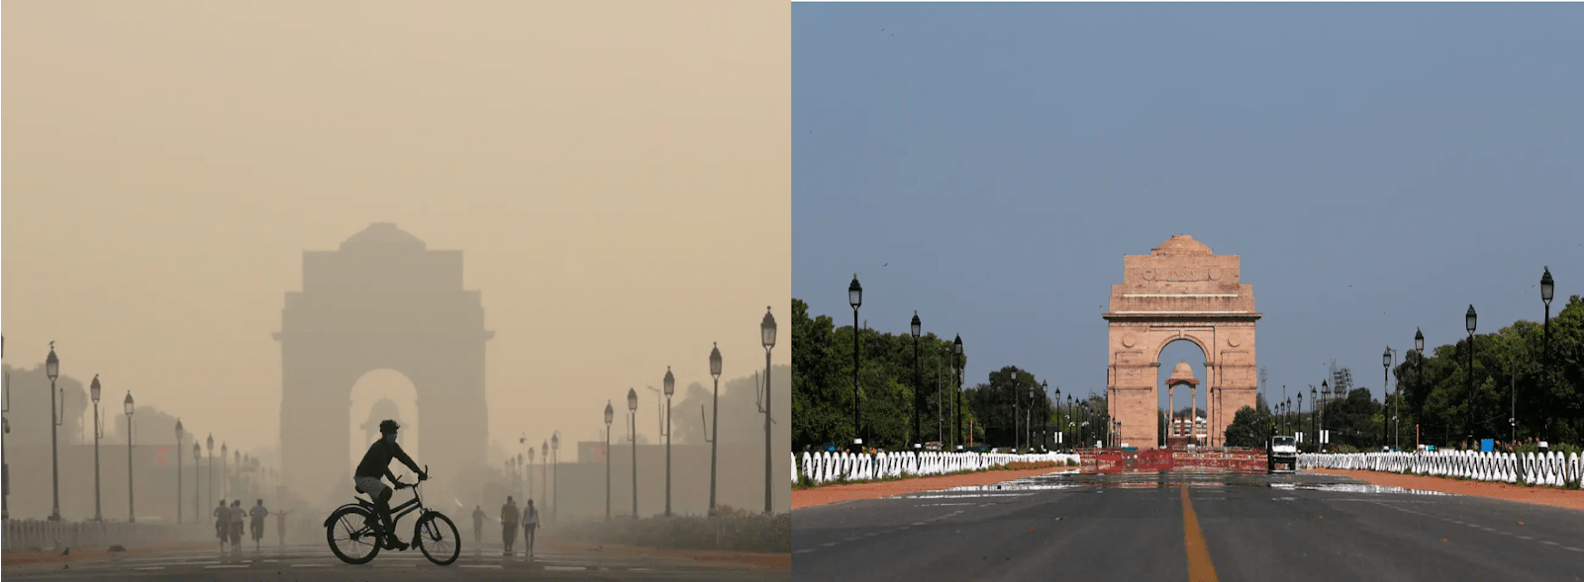 [smoggy vs clear photo of an arch in Delhi, India]